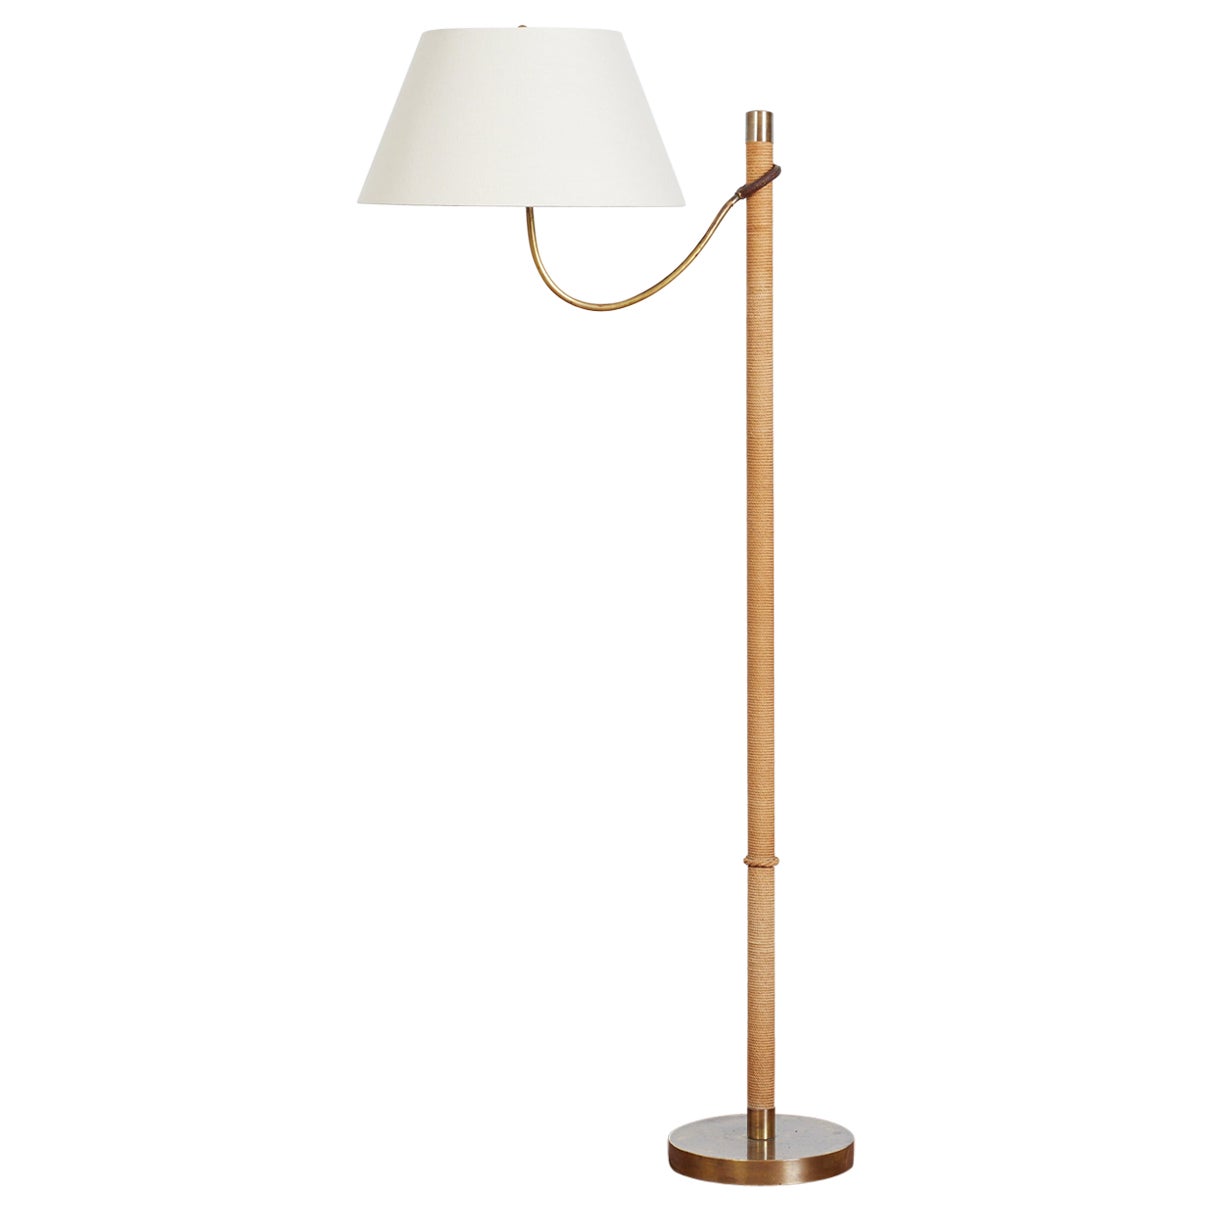 Italian Rope & Leather Floor lamp - 1950s For Sale